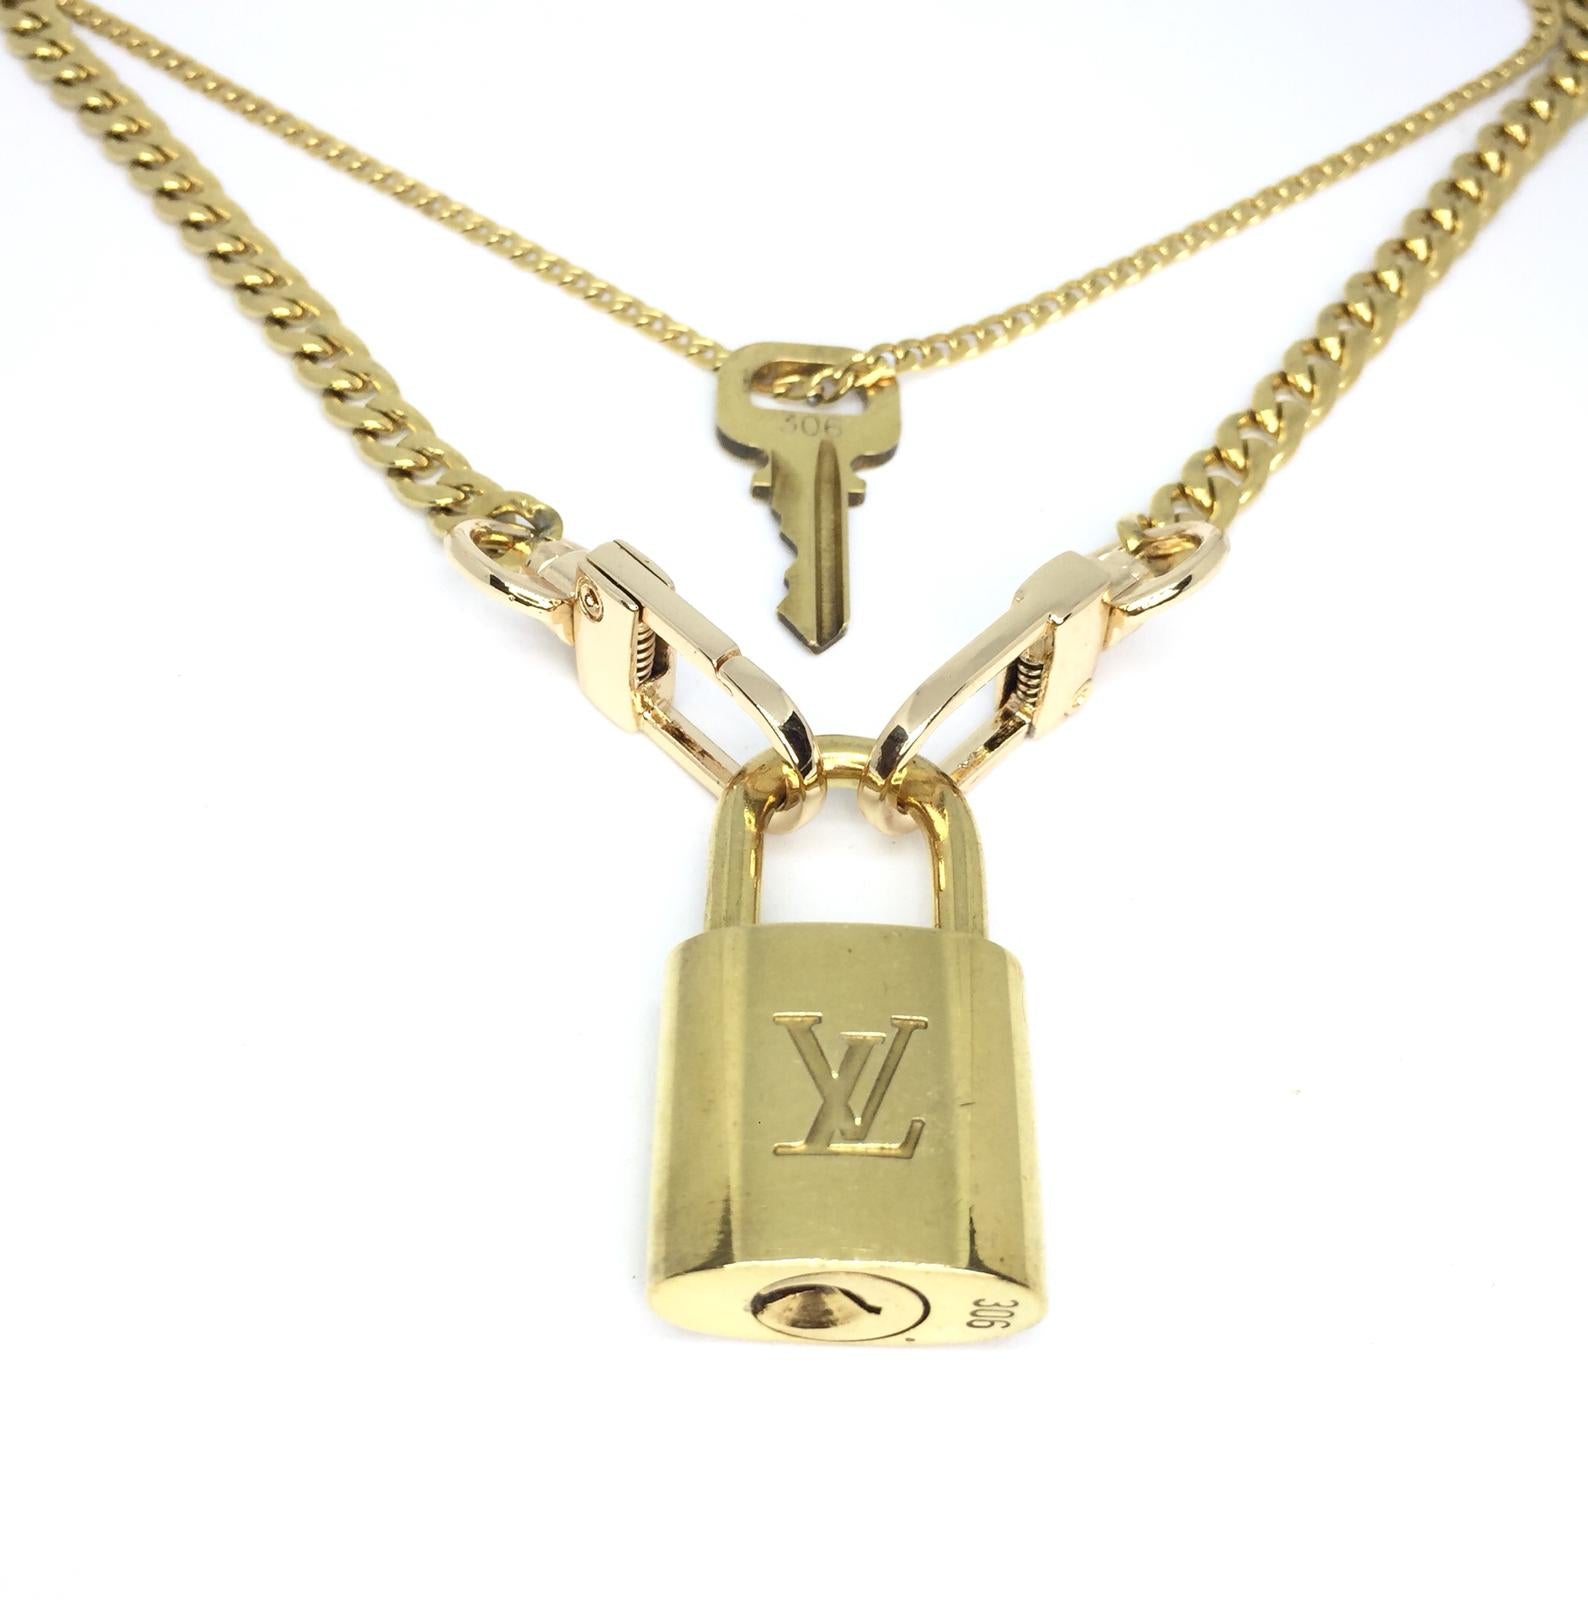 LOUIS VUITTON LOUIS VUITTON Flower full;M68125 Necklace Gold Plated Used LV  women M68125